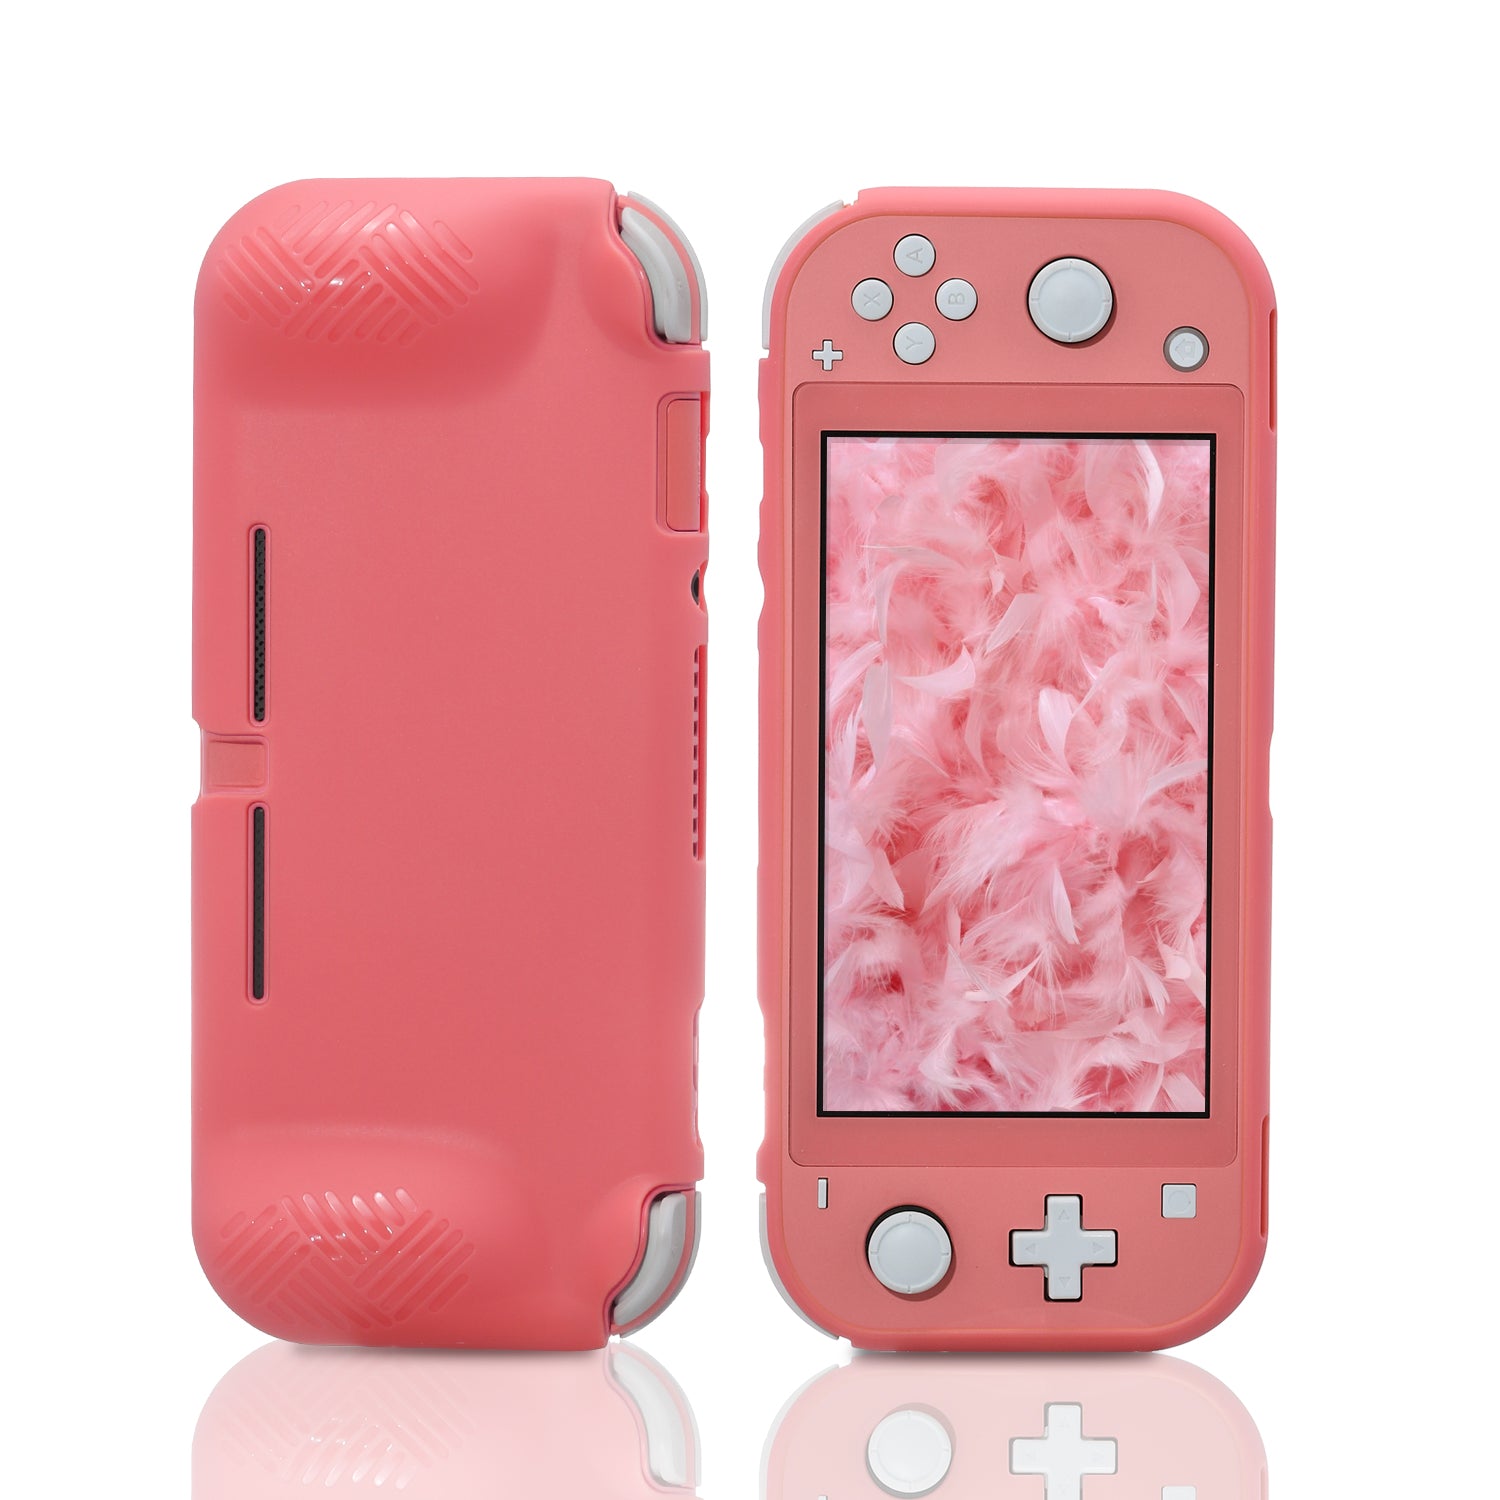 Grip Case for Nintendo Switch lite, Protective Cover Case ...